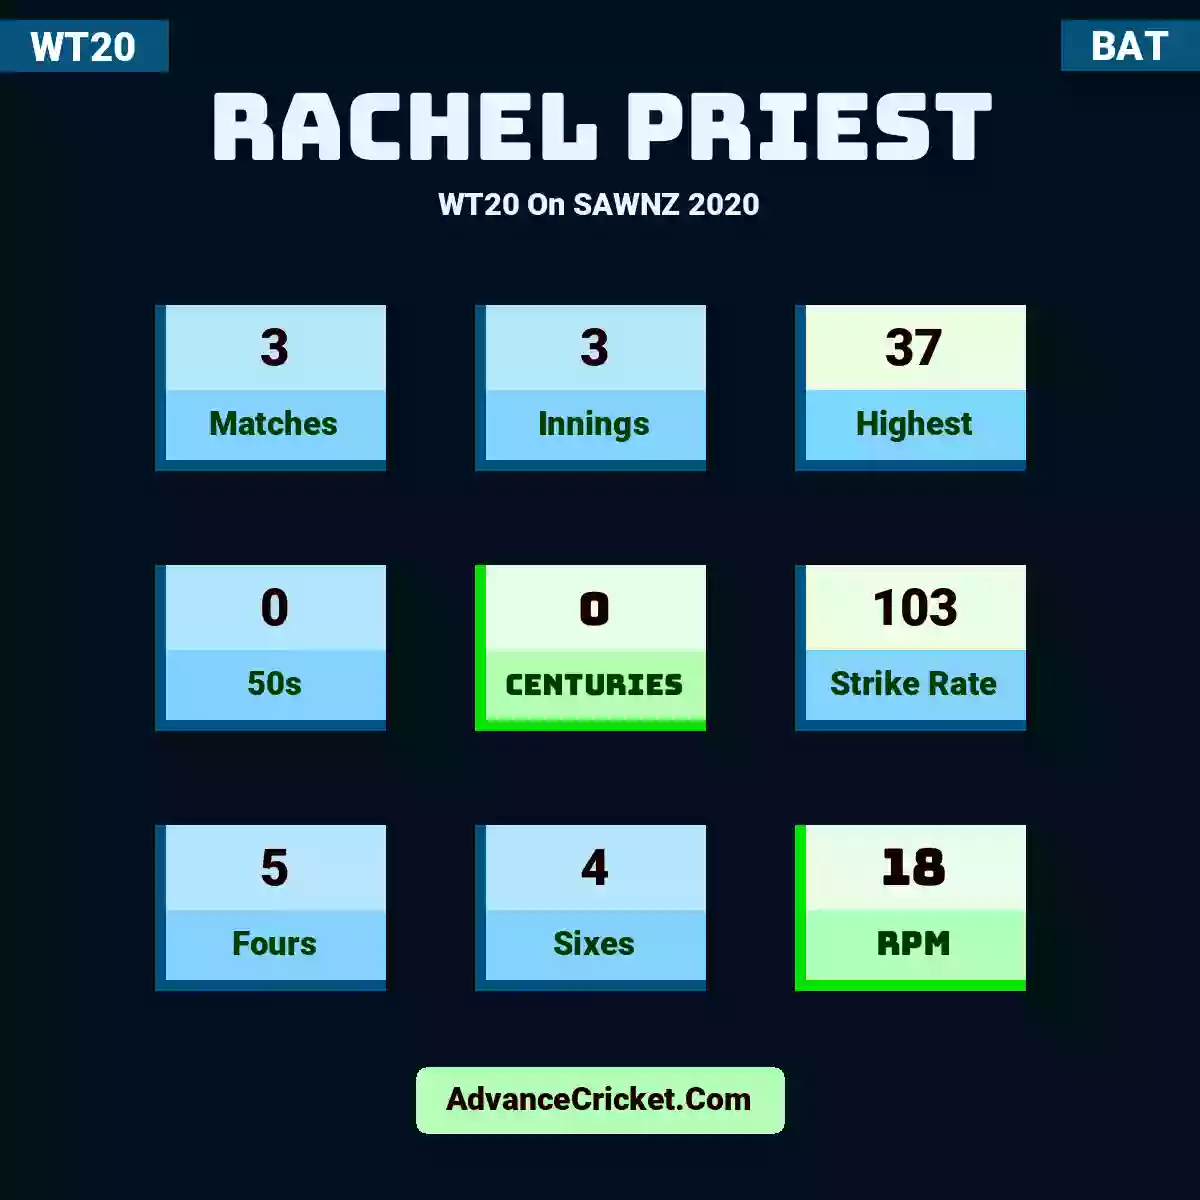 Rachel Priest WT20  On SAWNZ 2020, Rachel Priest played 3 matches, scored 37 runs as highest, 0 half-centuries, and 0 centuries, with a strike rate of 103. R.Priest hit 5 fours and 4 sixes, with an RPM of 18.